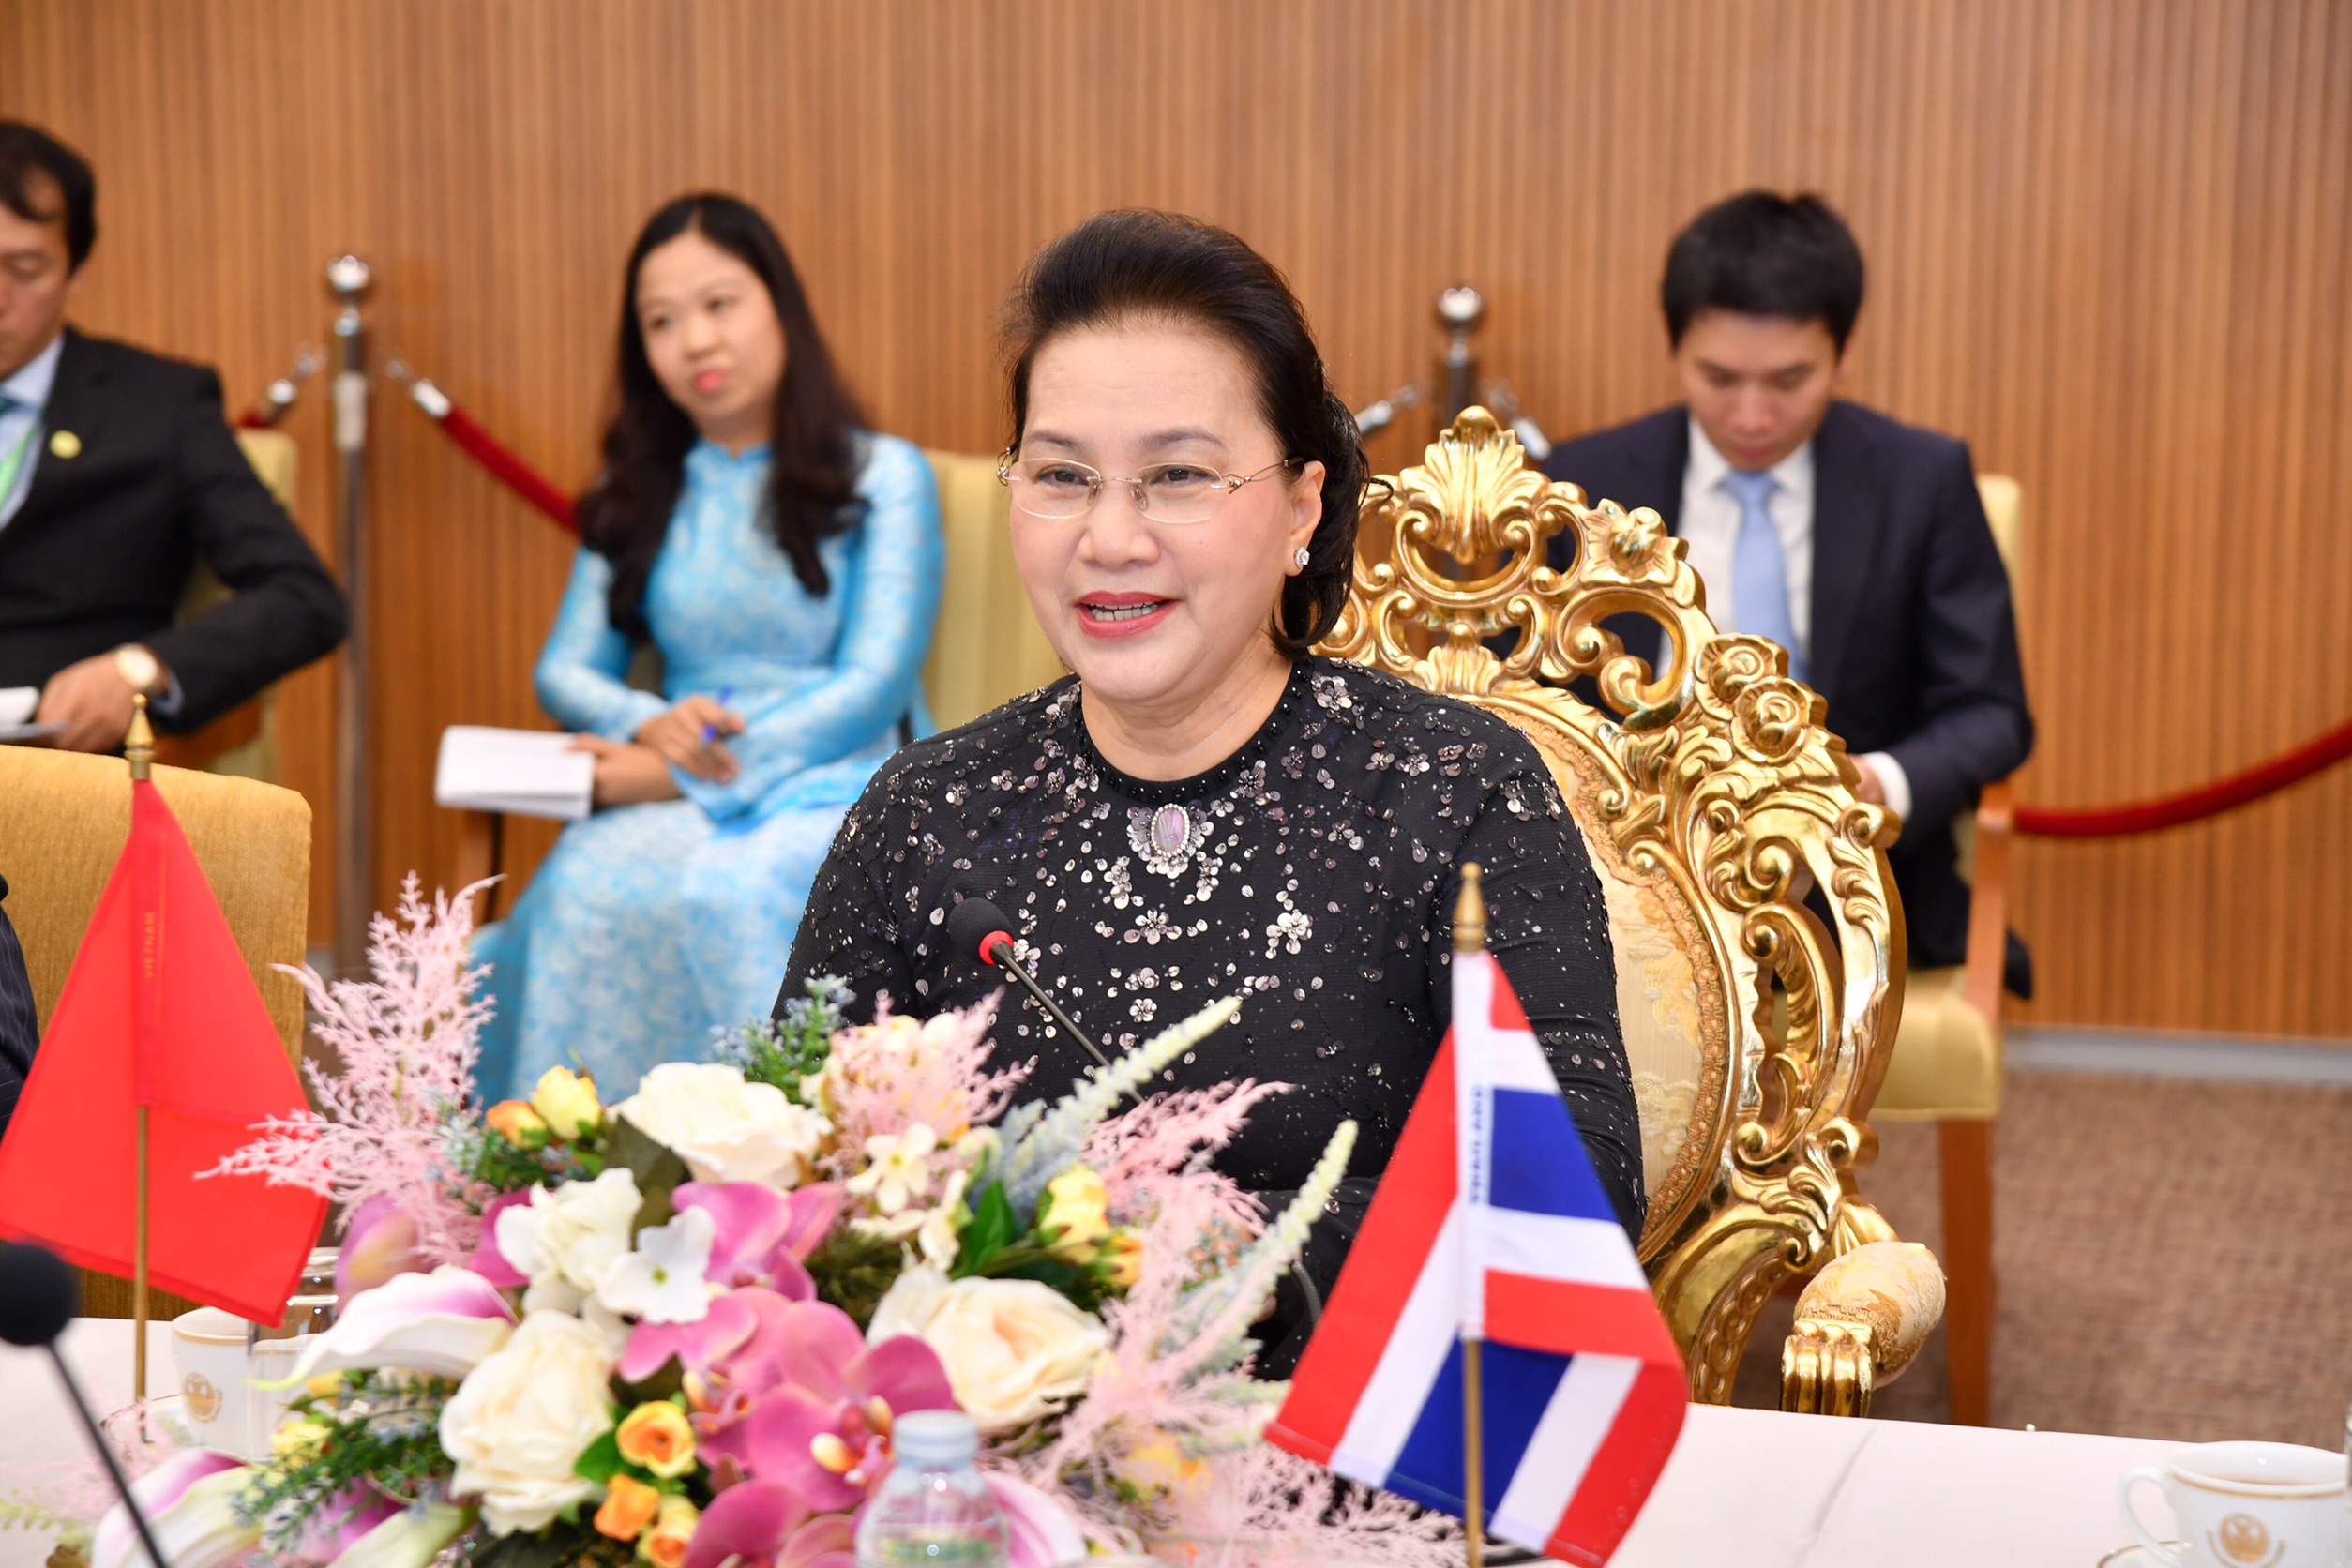 H.E. Ms. Nguyen Thi Kim Ngan, Chairwoman of the National Assembly of the Socialist Republic of Vietnam, as a Guest of the Thai National Assembly had a bilateral meeting with the President of the Senate during the Official Visit to Thailand (Aug 27, 2019)